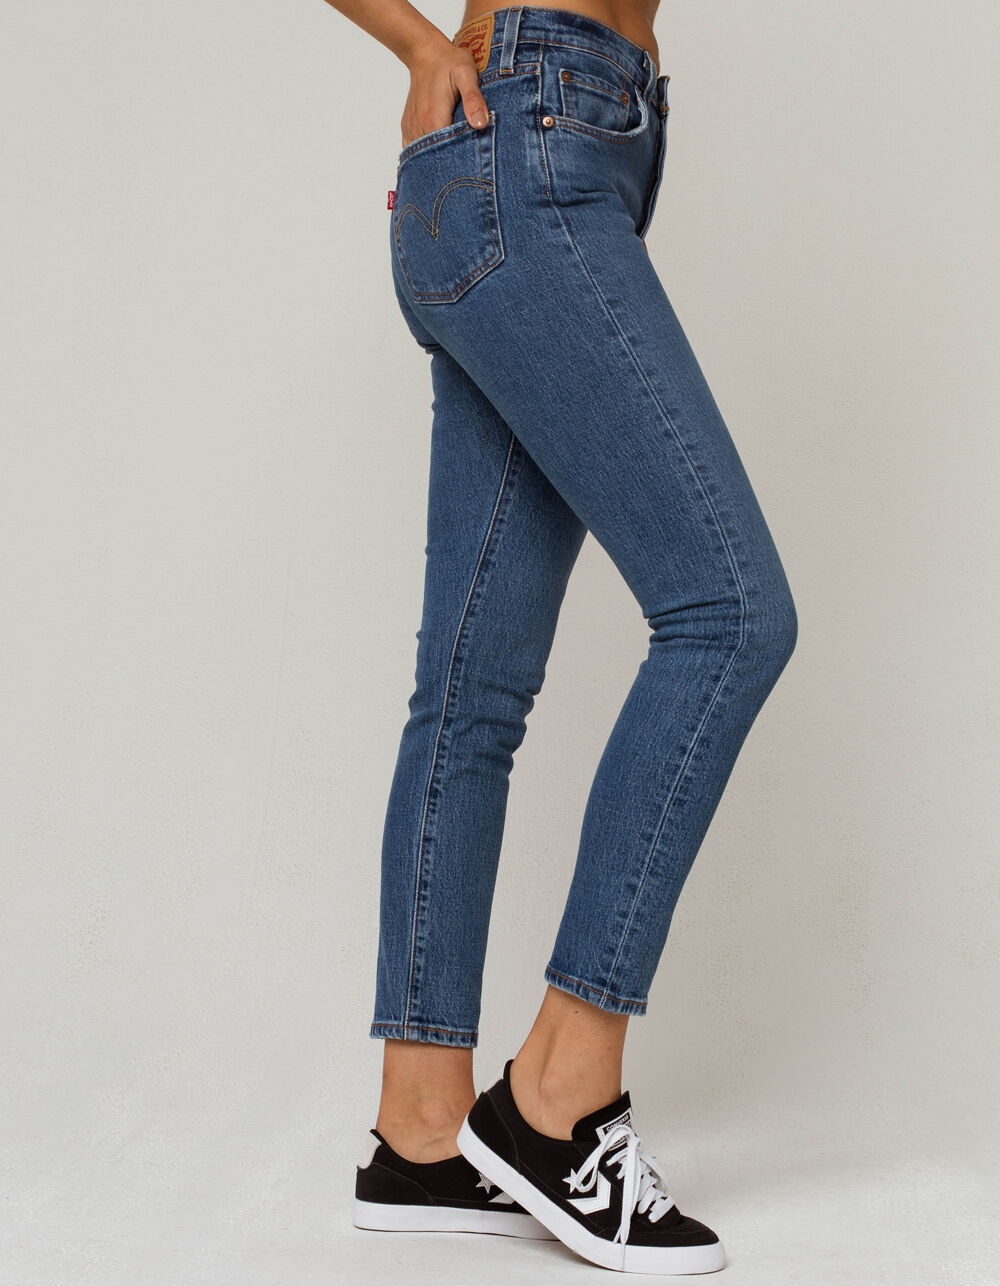 LEVI'S 501 Womens Skinny Jeans image number 2